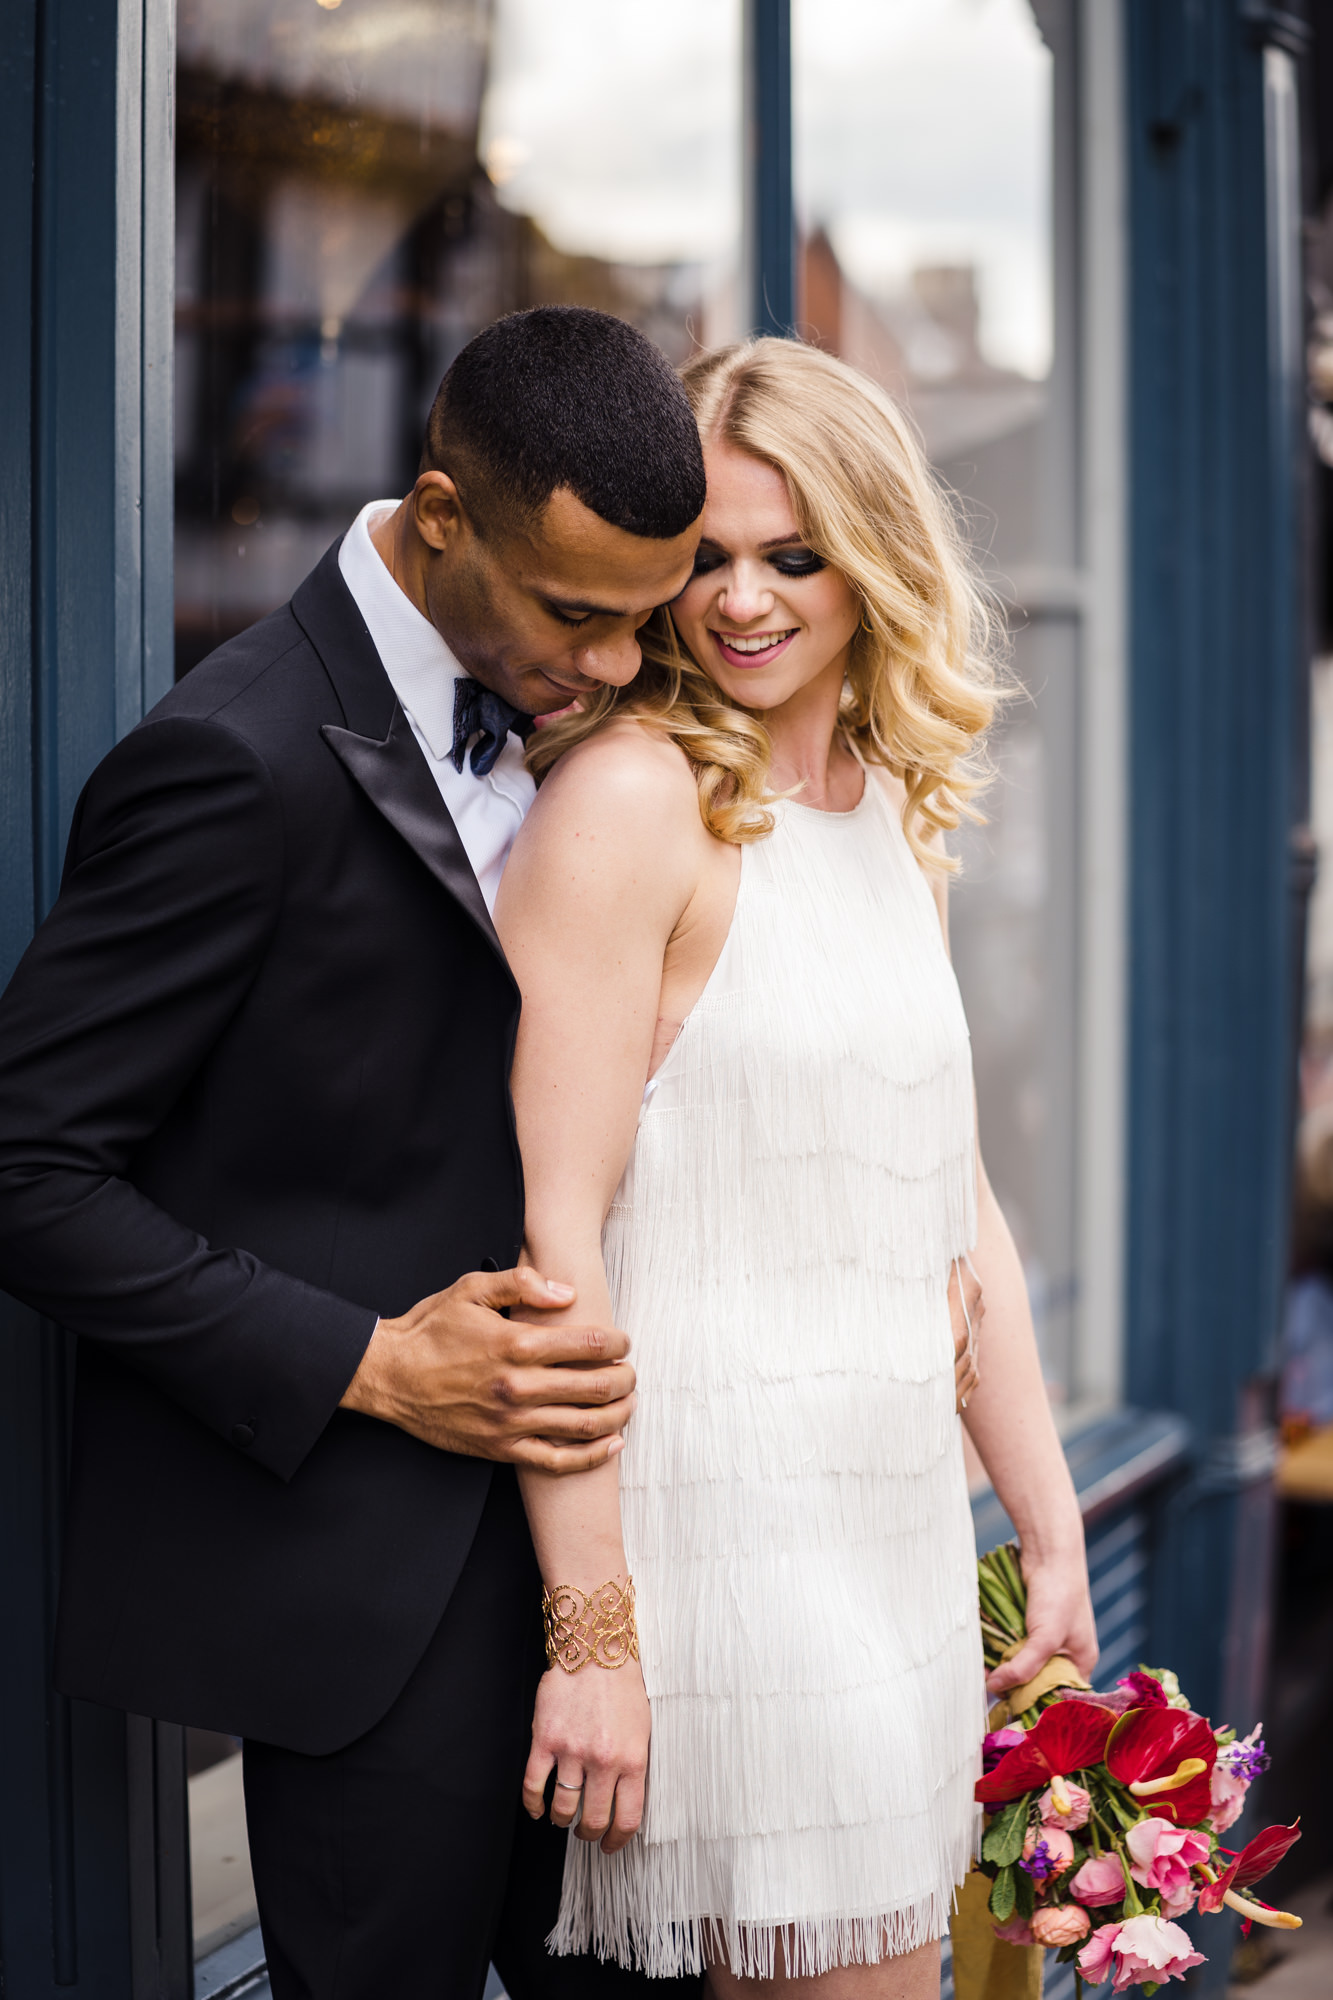 groom and bride embrace on a city street for wedding photos